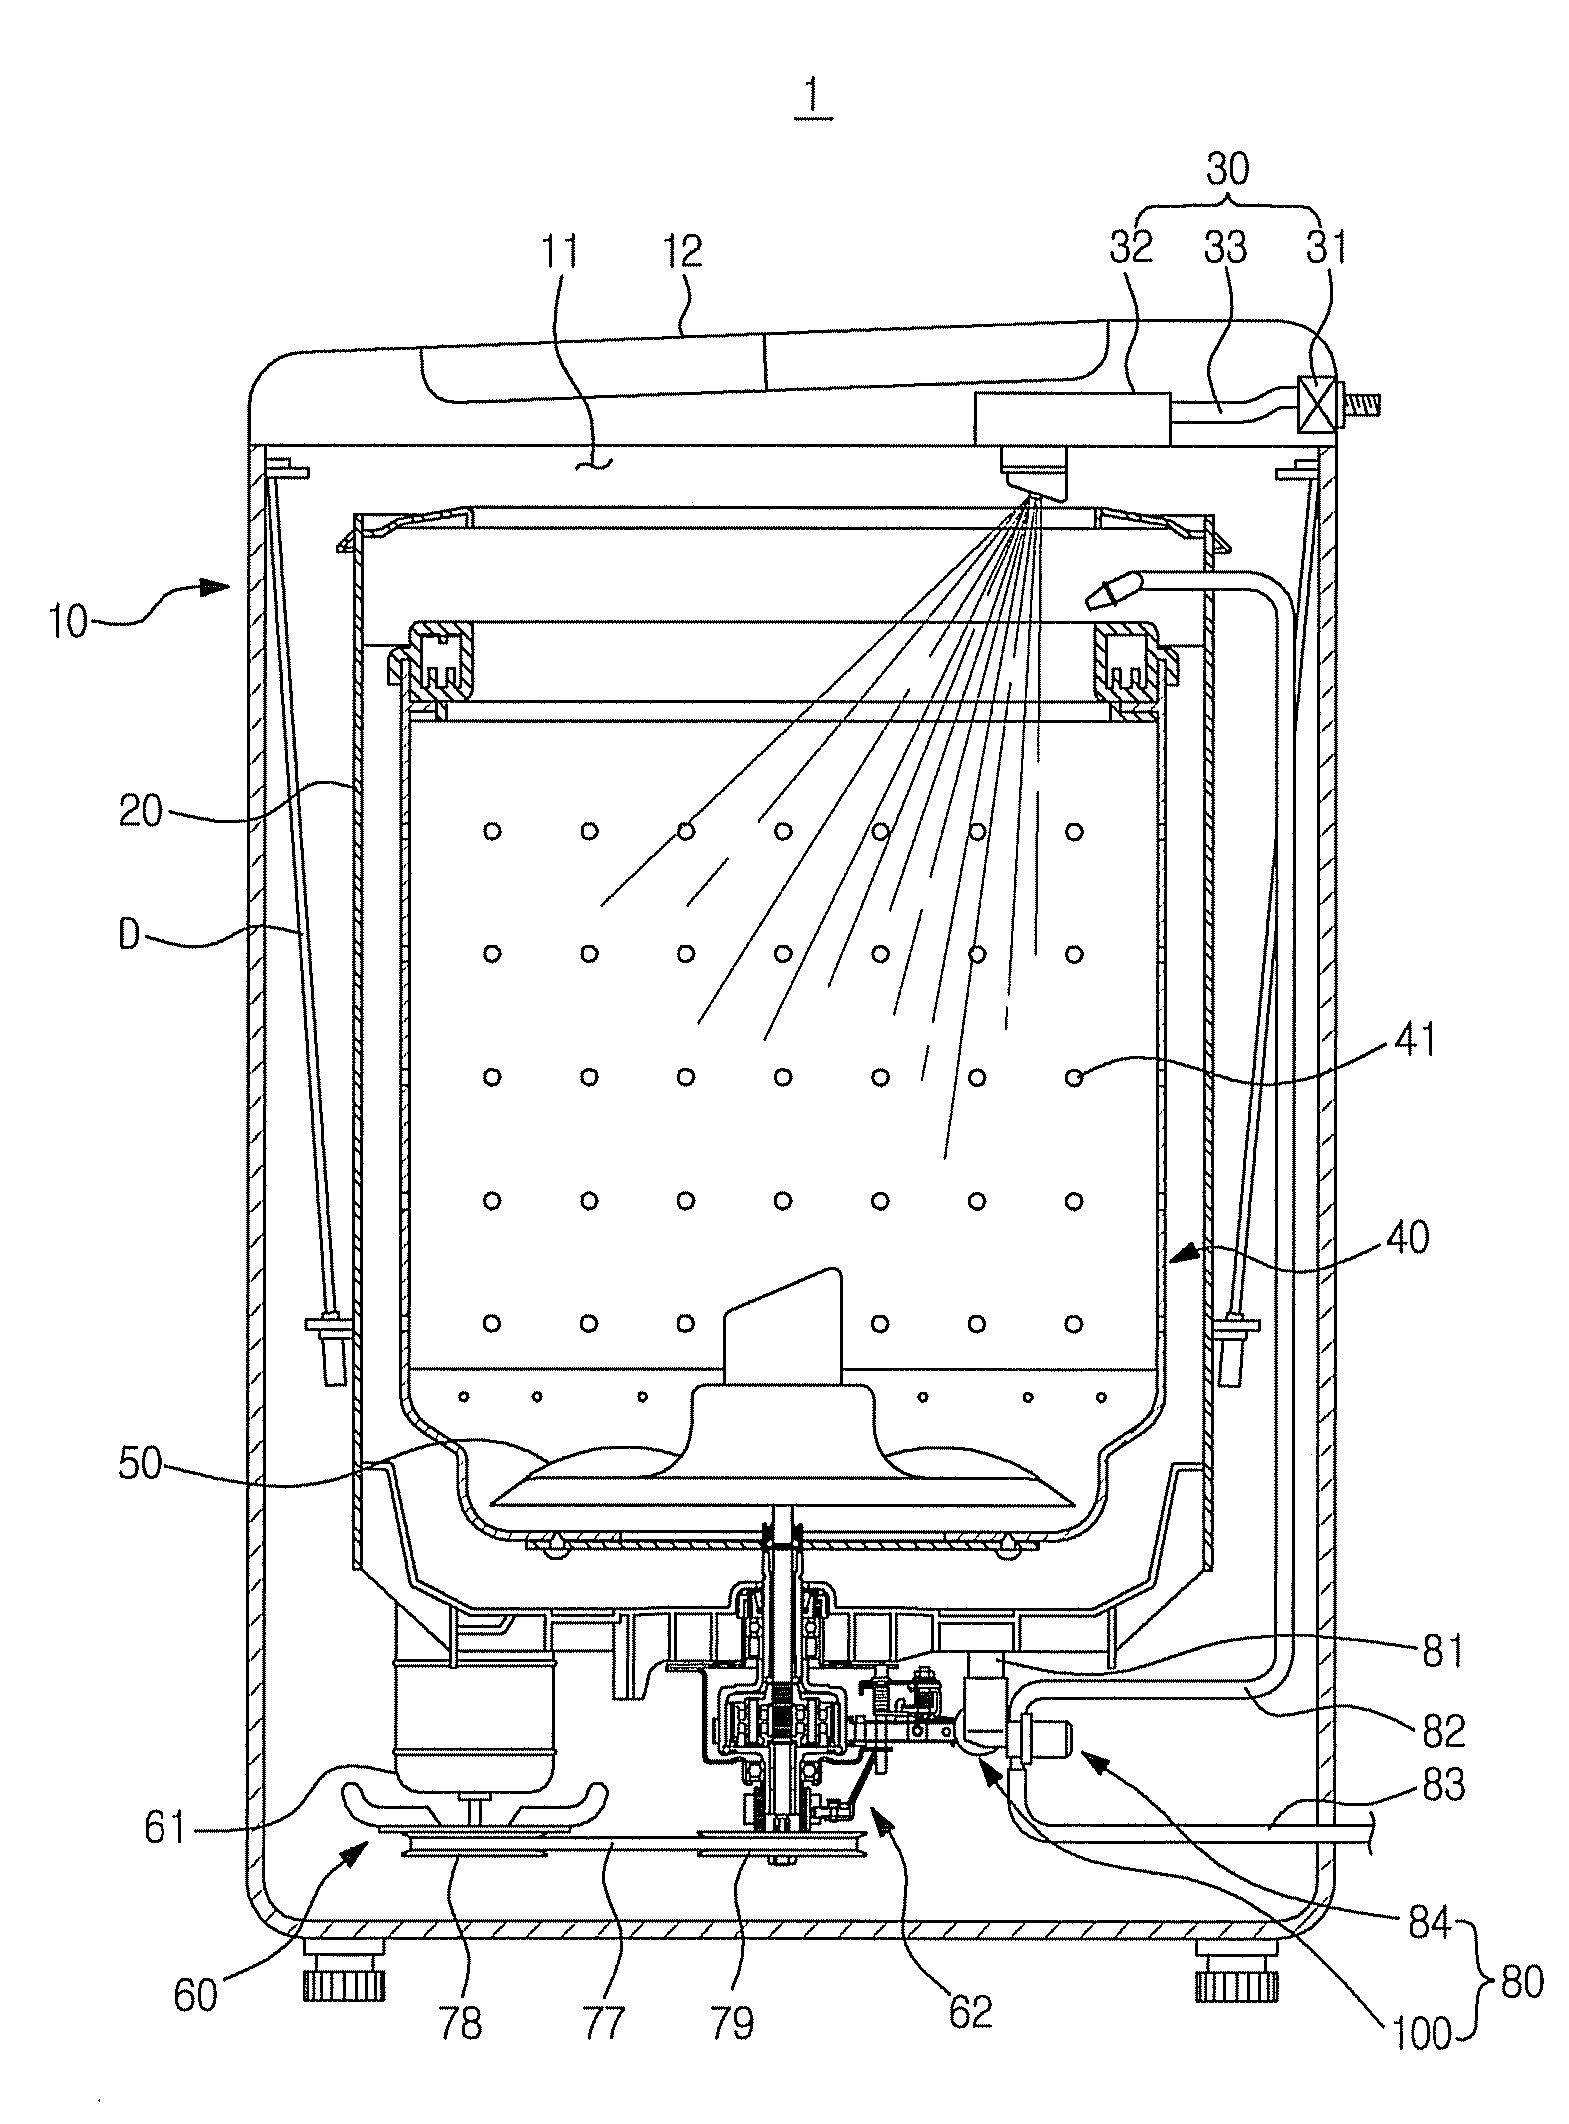 Circulation and drain system in a washing machine and a method thereof